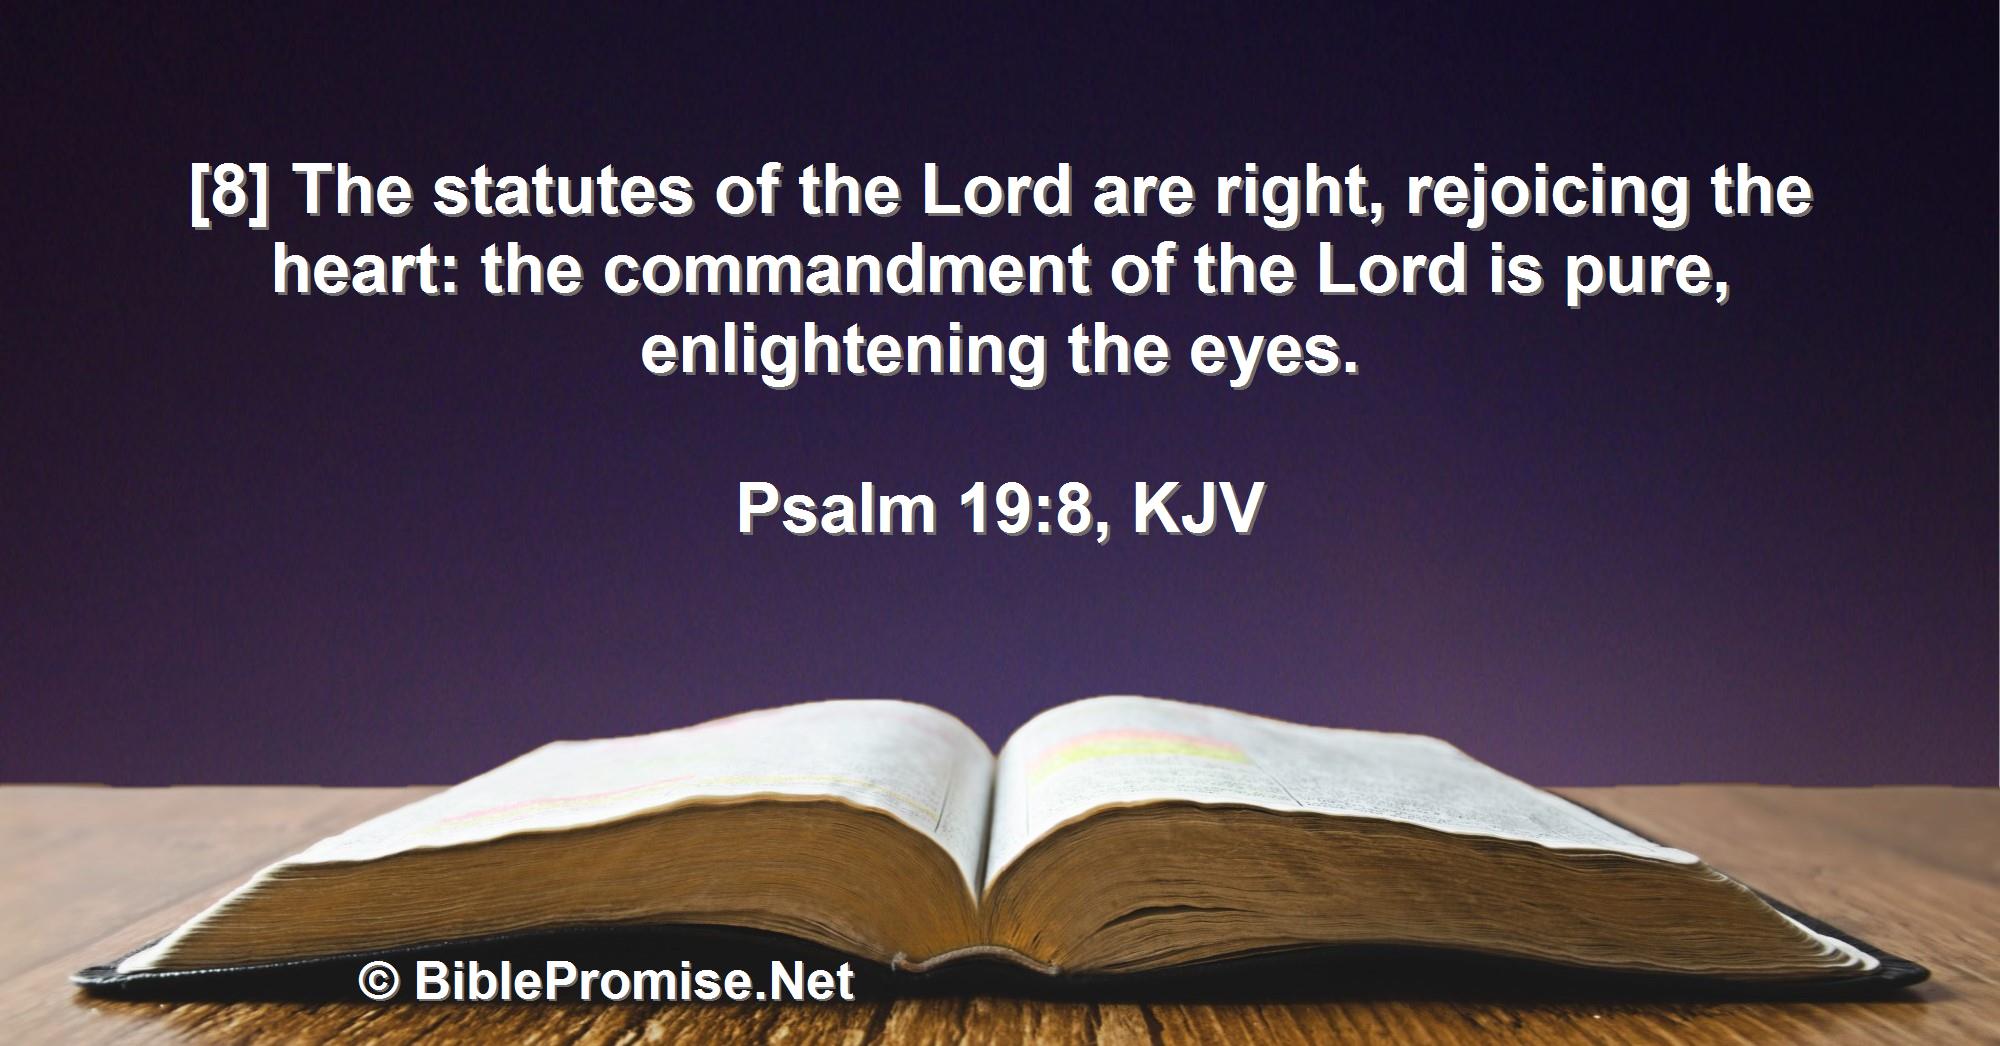 Monday, August 1, 2022 - Psalm 19:8 (KJV) - Bible promise that statutes of the Lord are rejoicing the heart and the commandment of the Lord is enlightening the eyes.